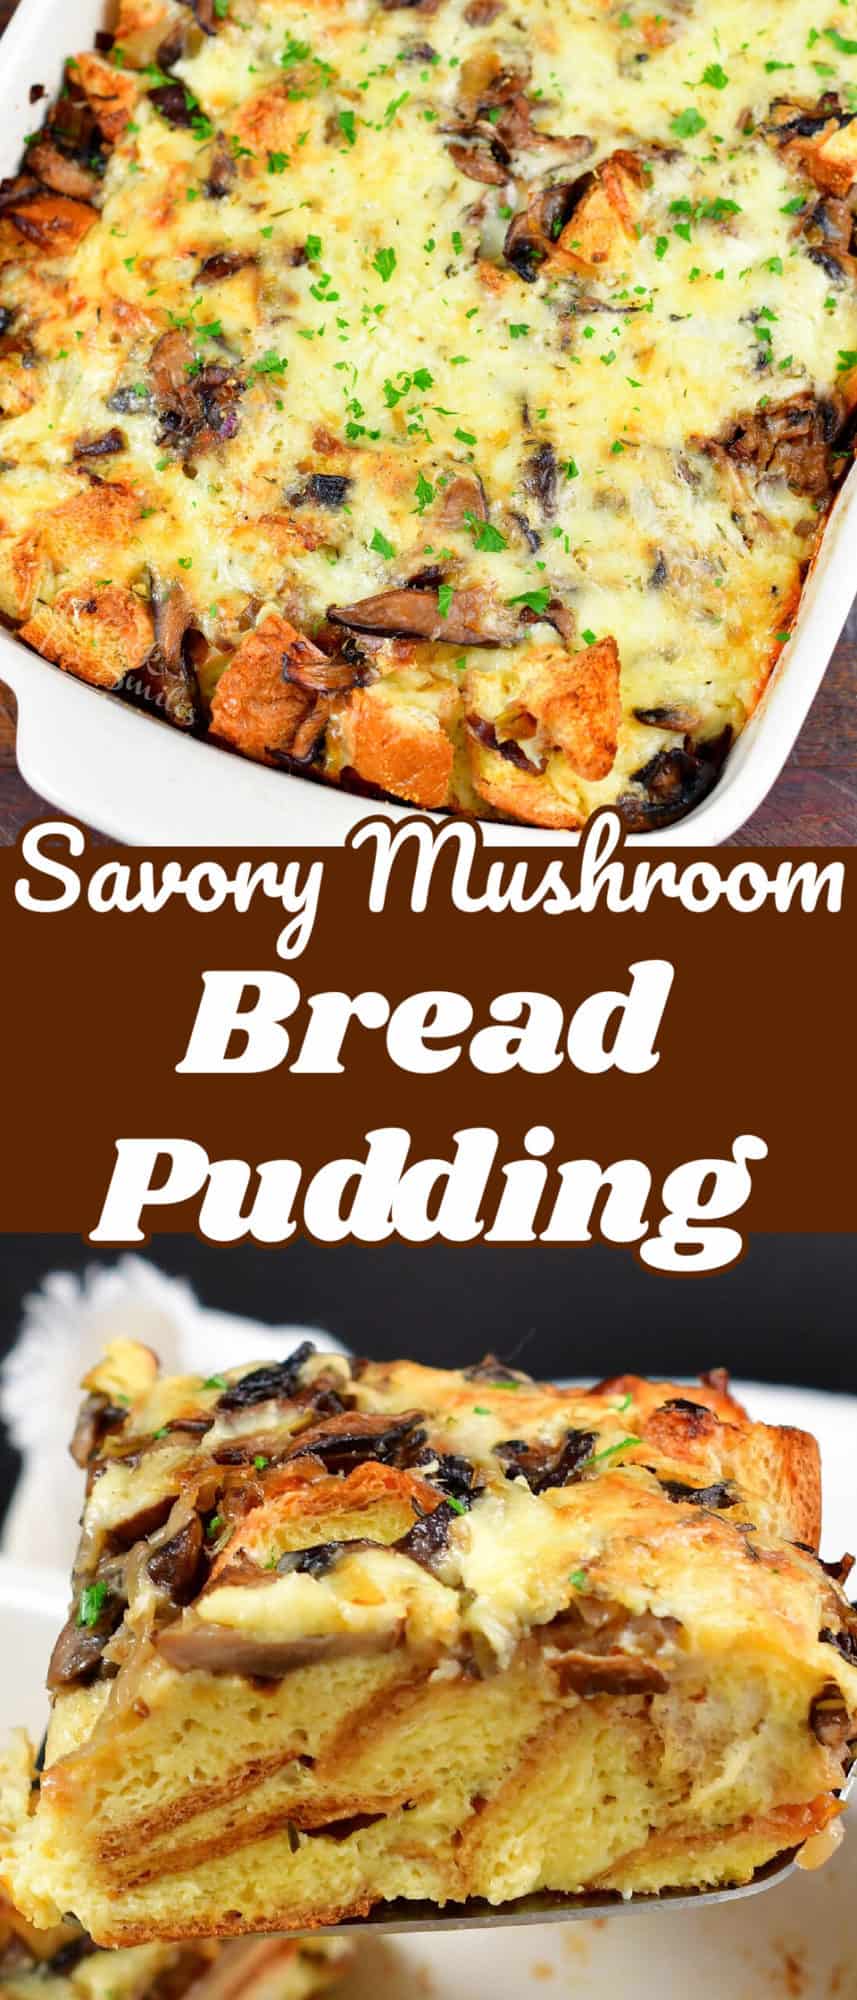 collage of two images of mushroom bread pudding with title in the middle